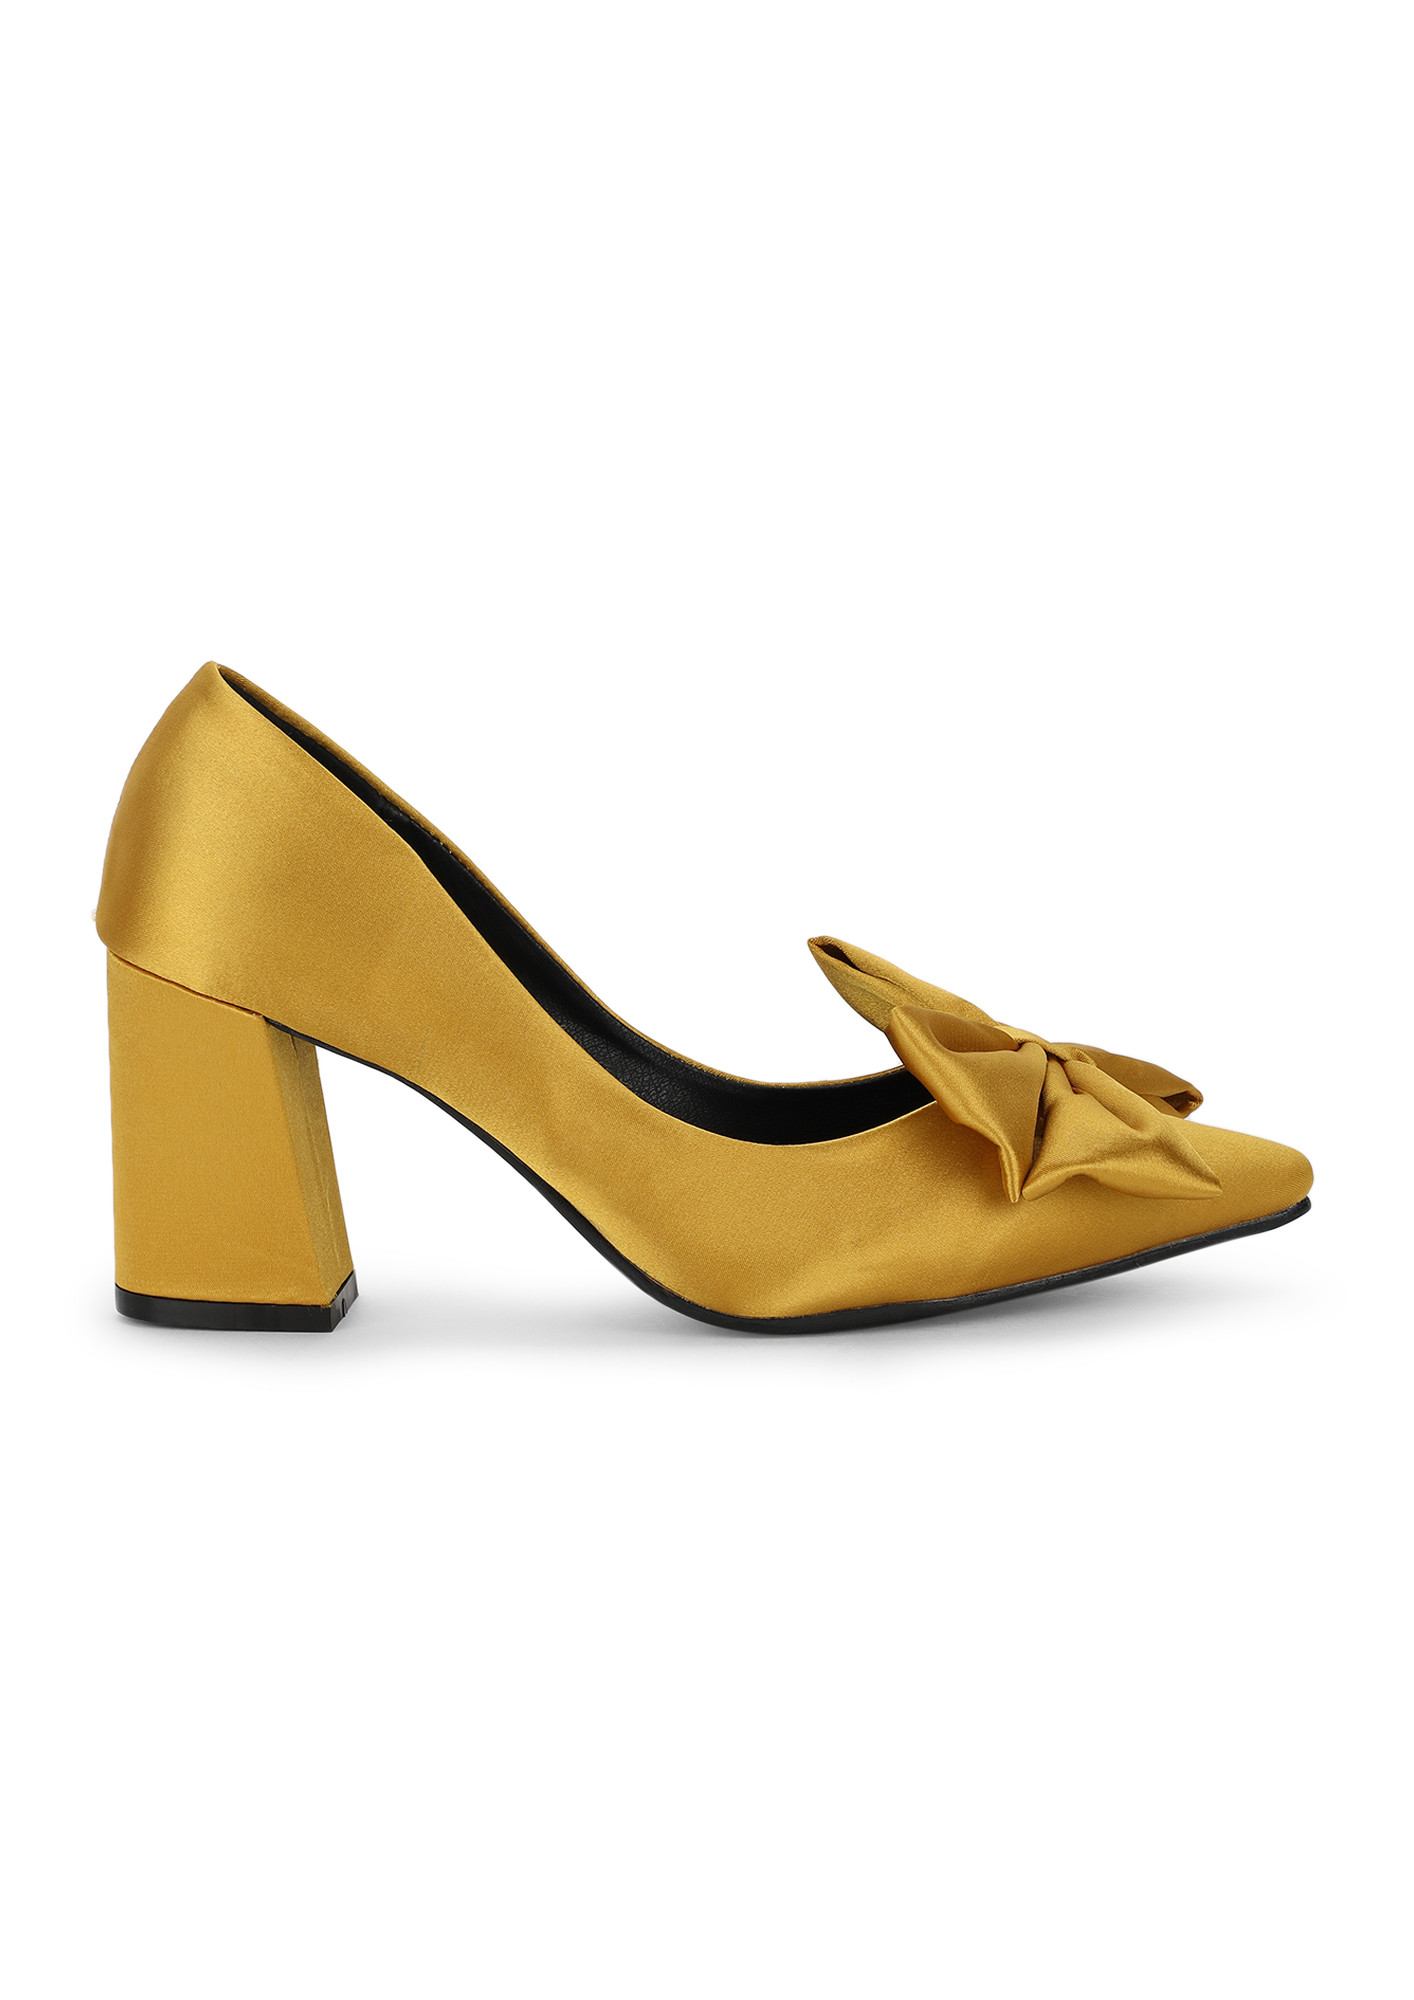 Barely There Block Heel In Neon Yellow – Fearless